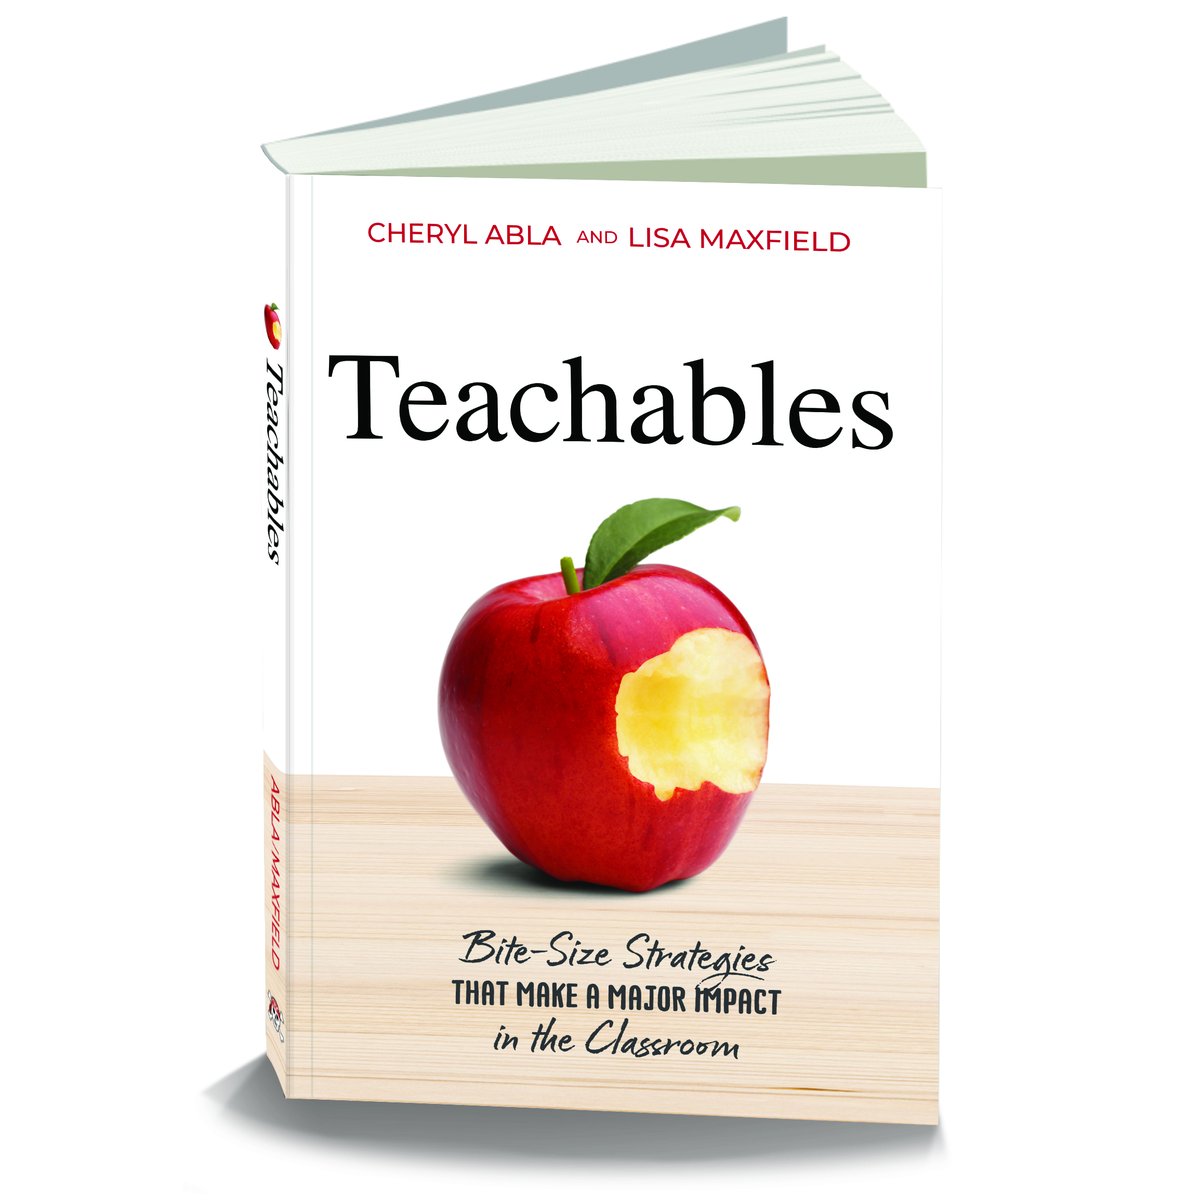 Hey #tlap!!! Check out our last two projects!! #Teachables by @cherylabla & @leemaxfield29 a.co/d/5mUl8ce 50 Ways to Engage Students w/ #GoogleApps by @alicekeeler & @LyonsLetters a.co/d/eL3hoPE #dbcincbooks @dbc_inc